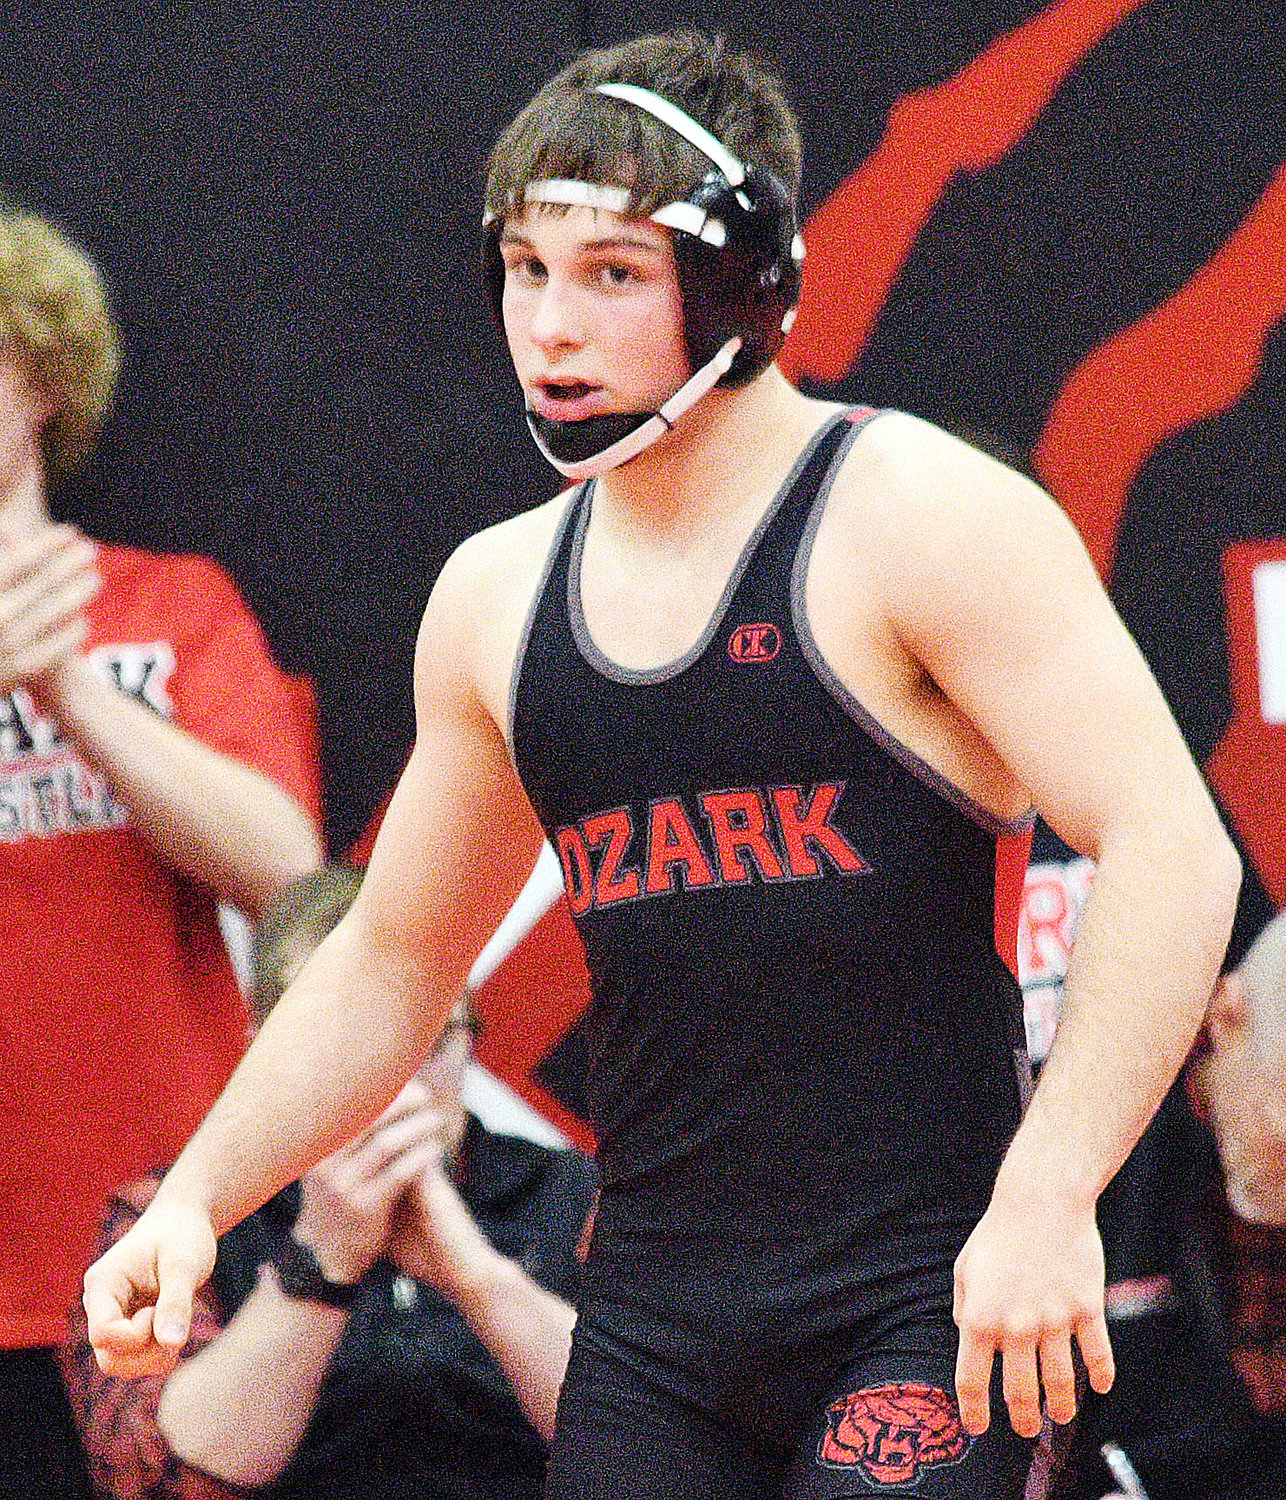 BRAXtON STRICK finished third at State as a freshman and second as a sophomore.